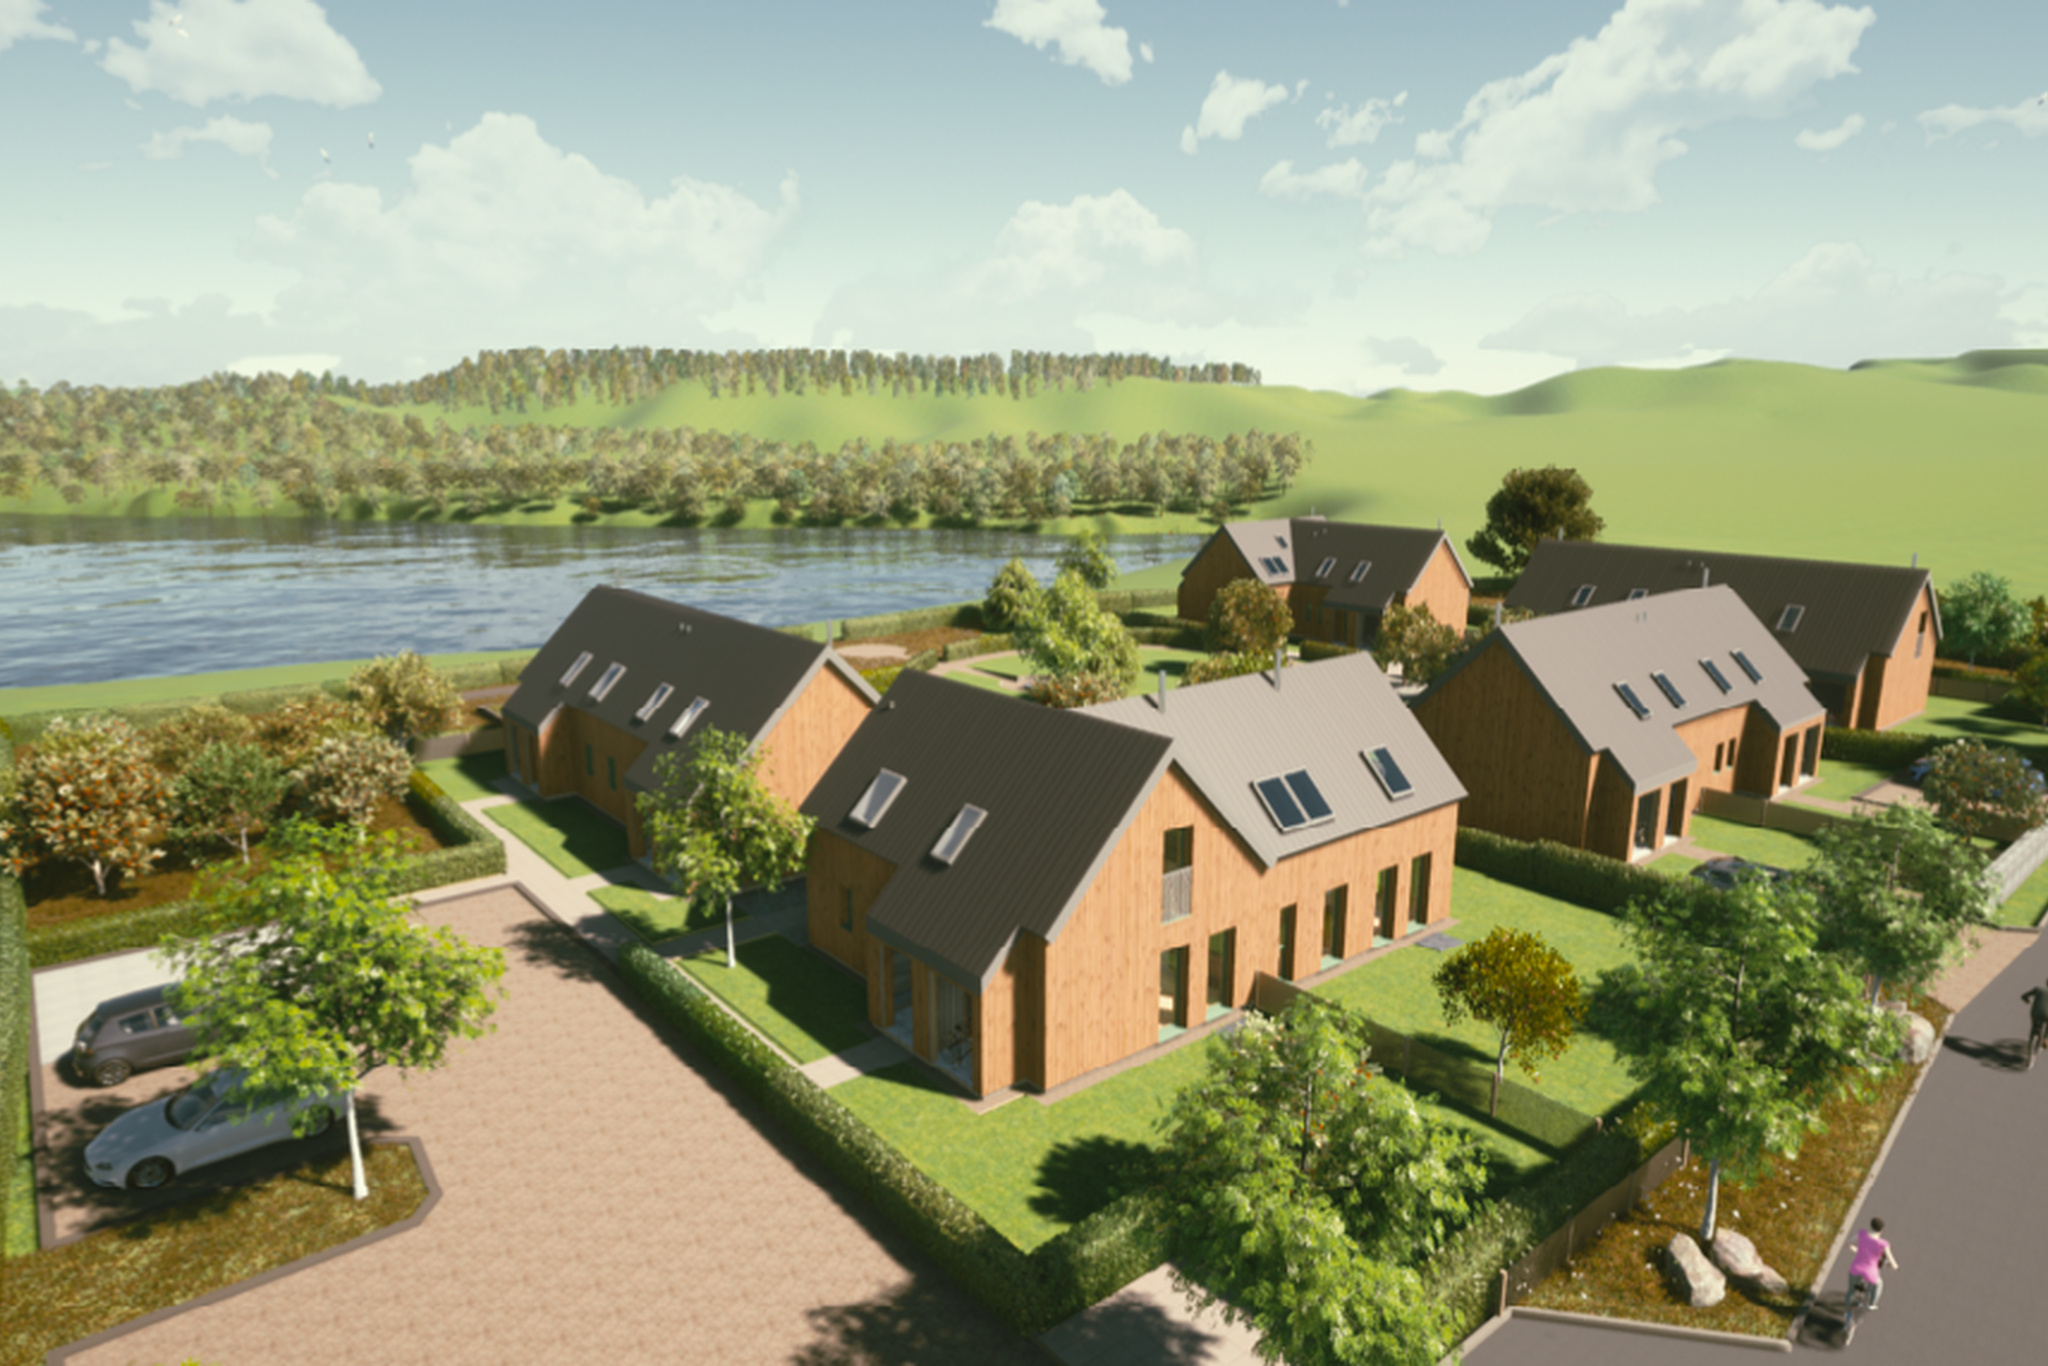 Ise of Bute eco starter homes near completion